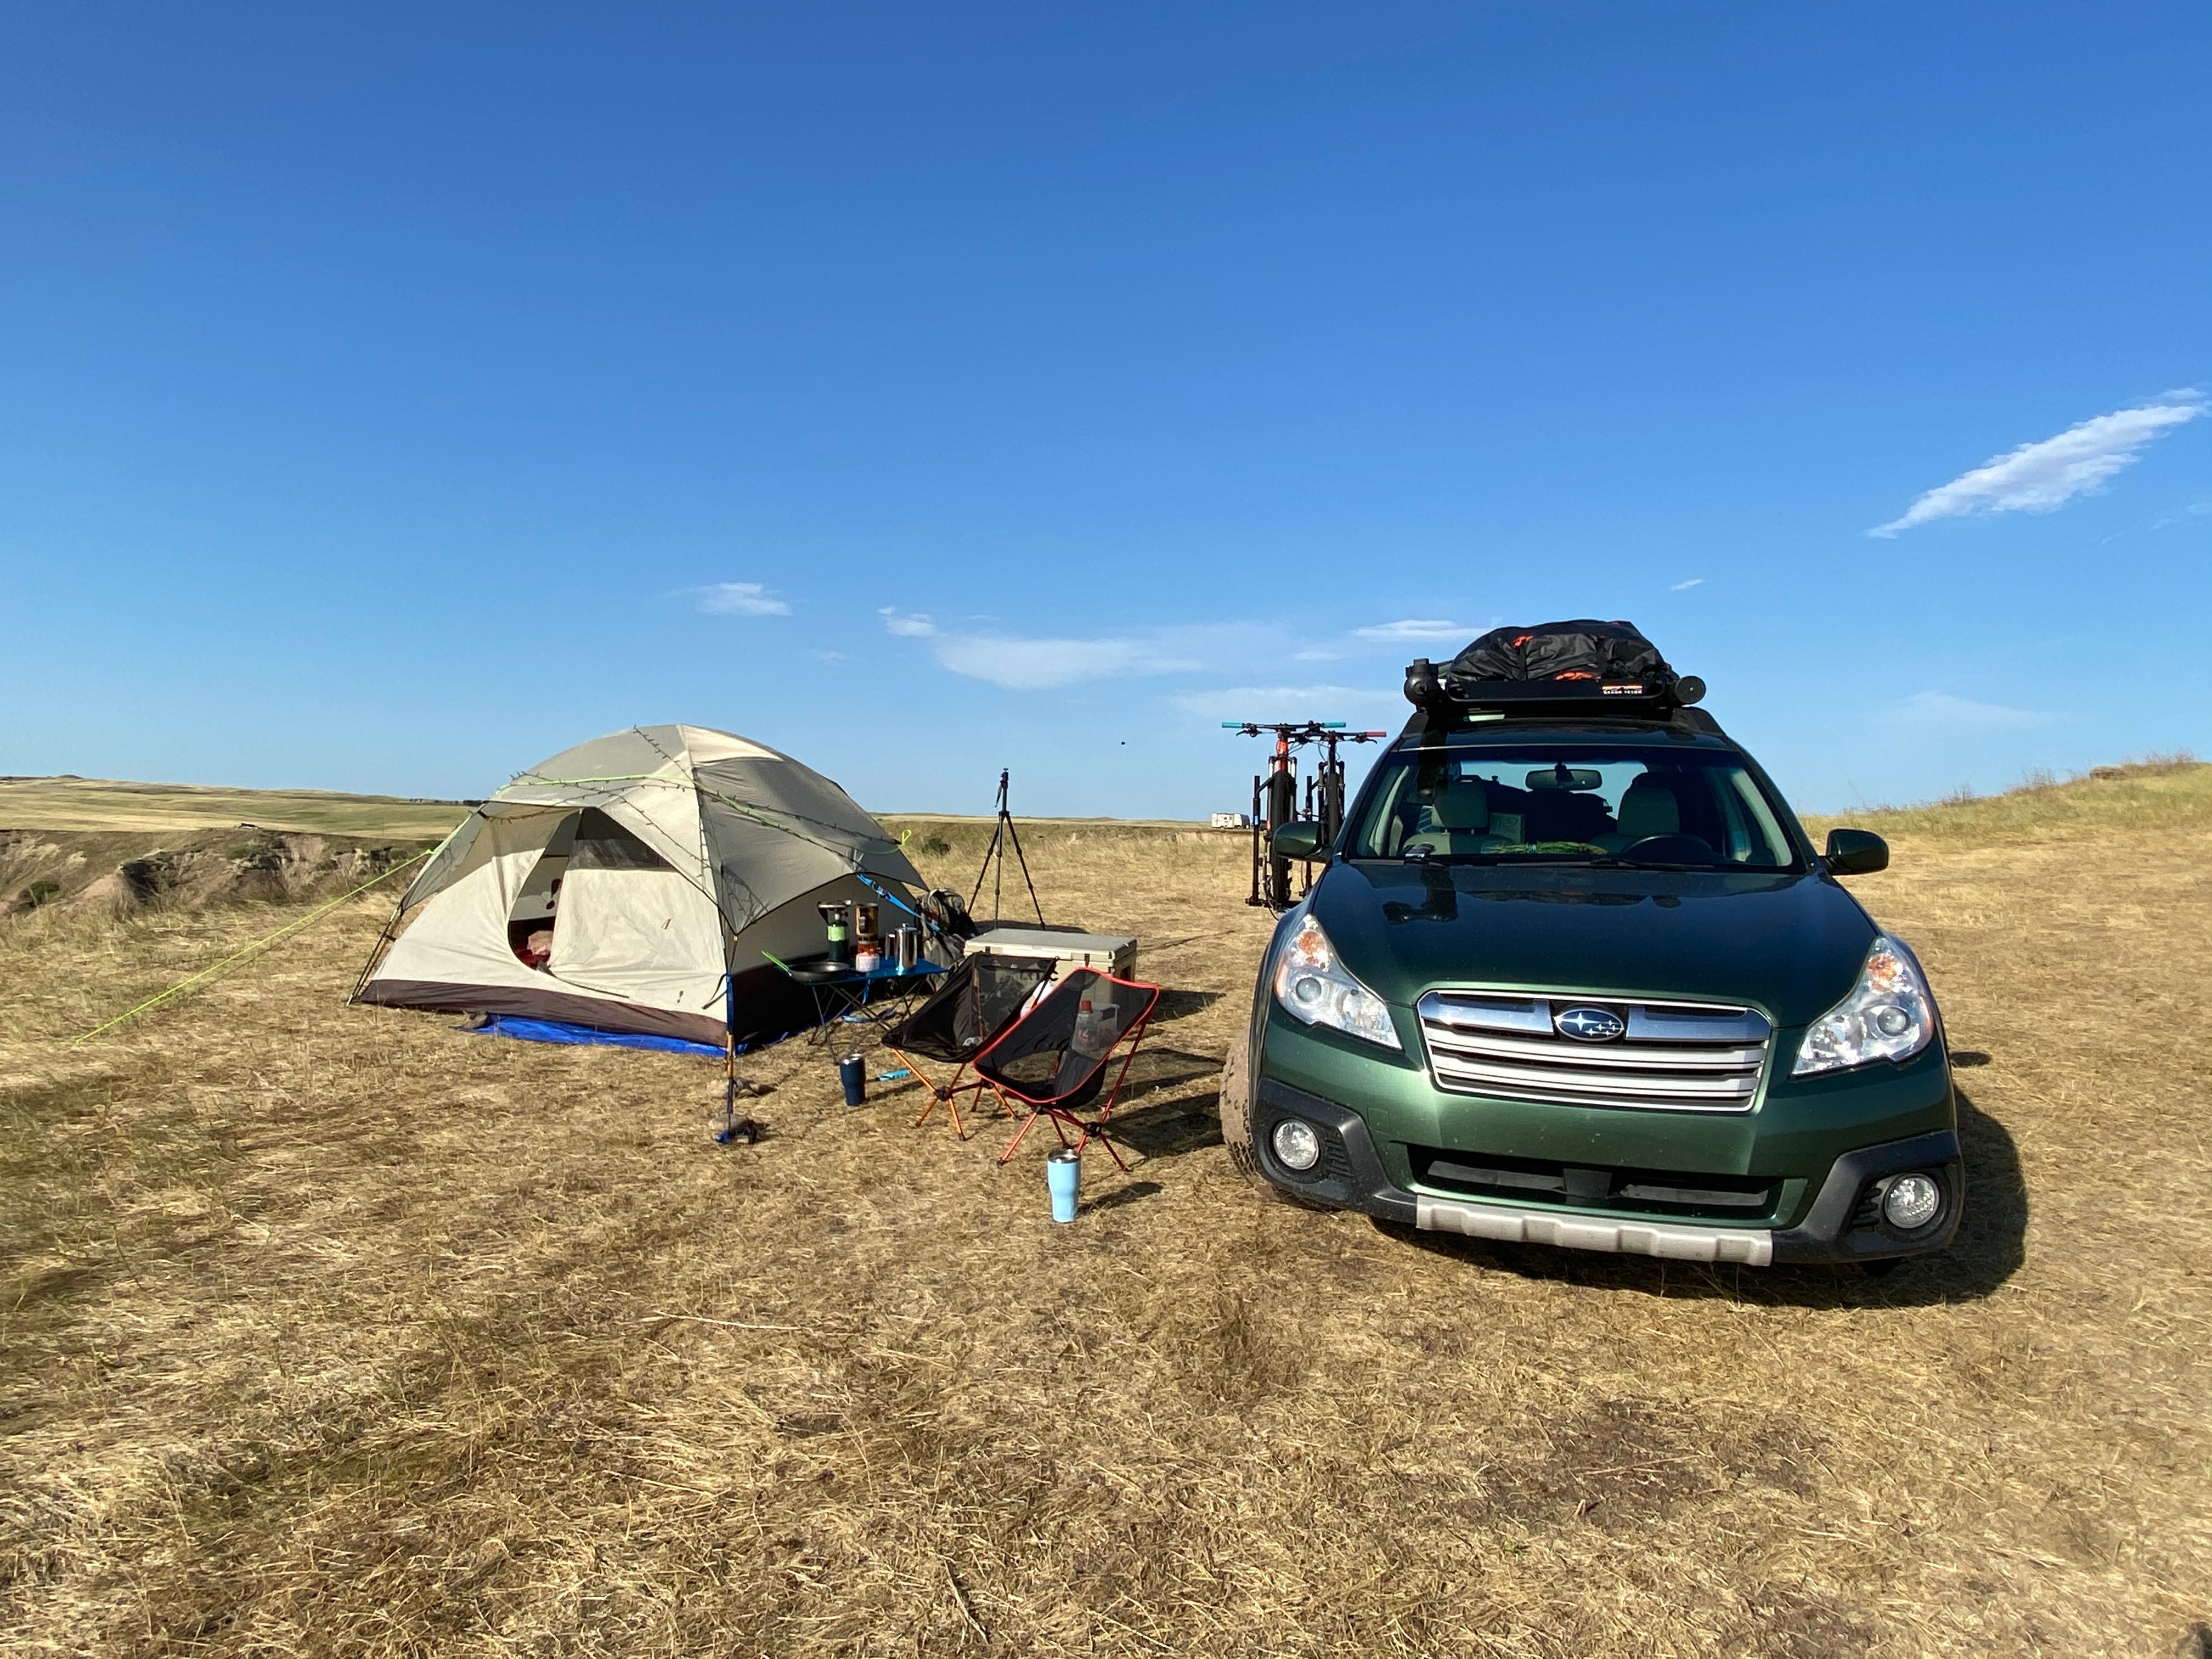 Camper submitted image from Buffalo Gap Dispersed Camping - 3